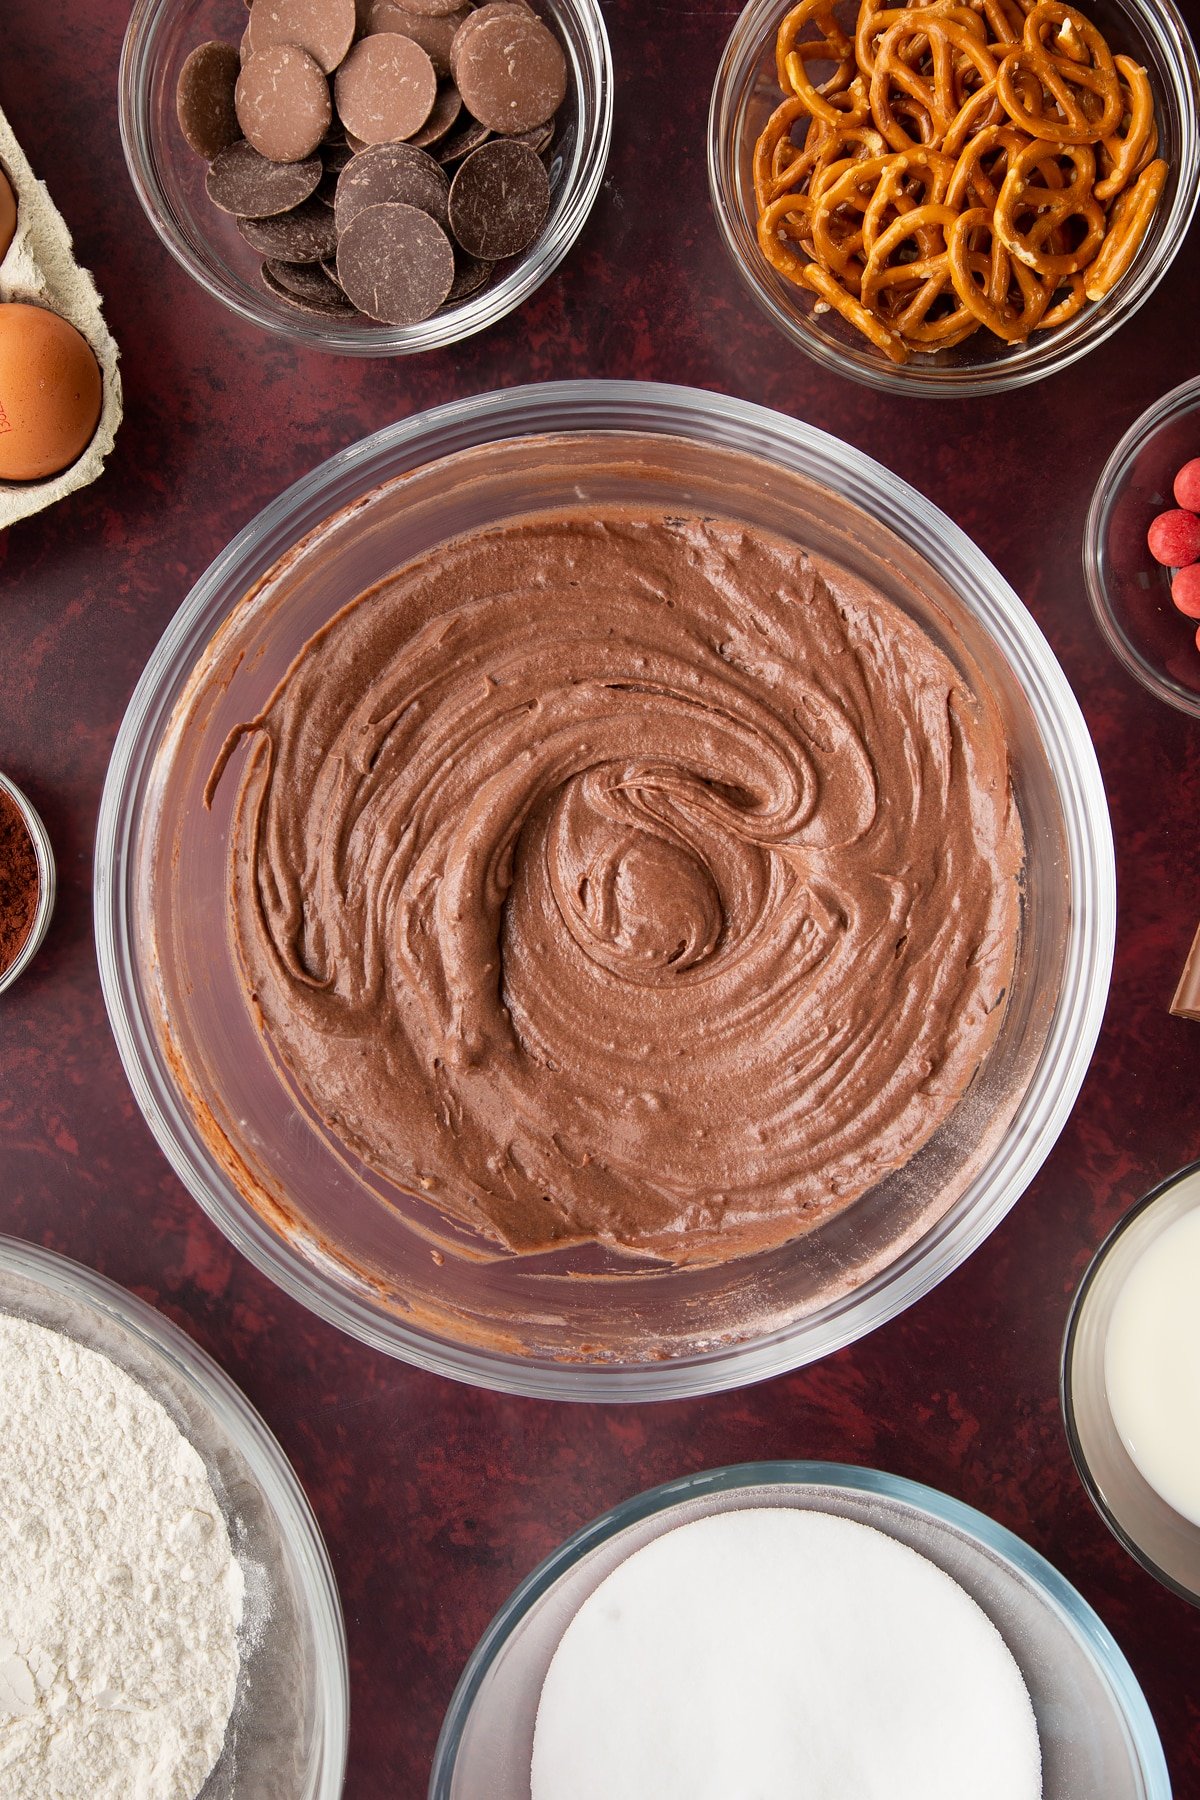 Chocolate cake batter in a bowl. Ingredients to make reindeer cupcakes surround the bowl.